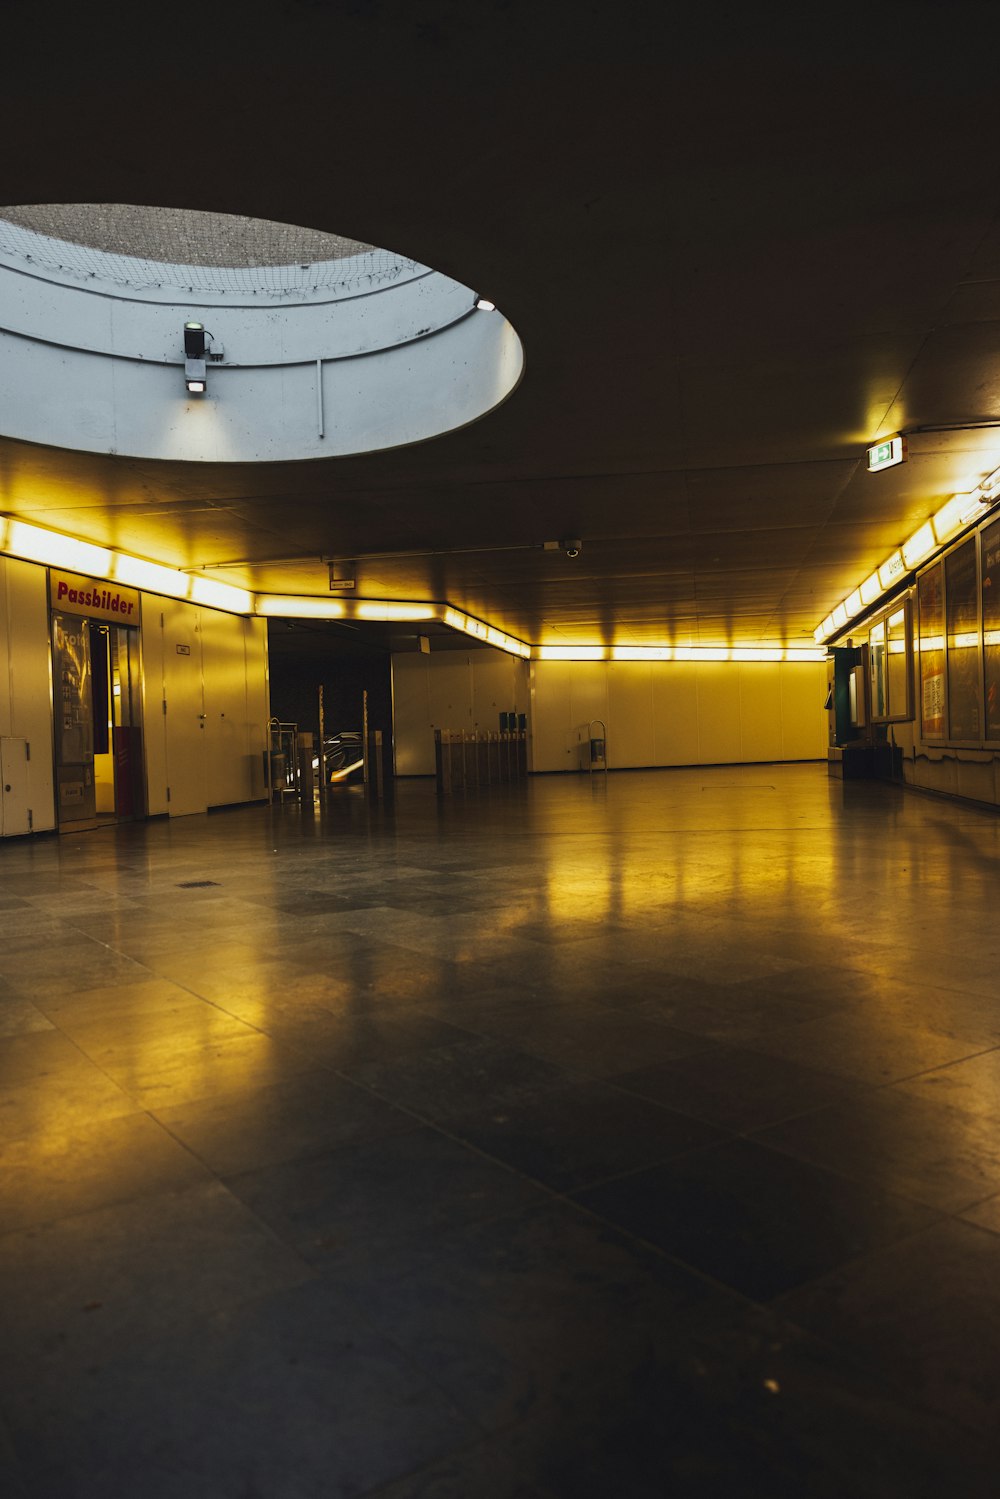 a dimly lit room with a circular ceiling